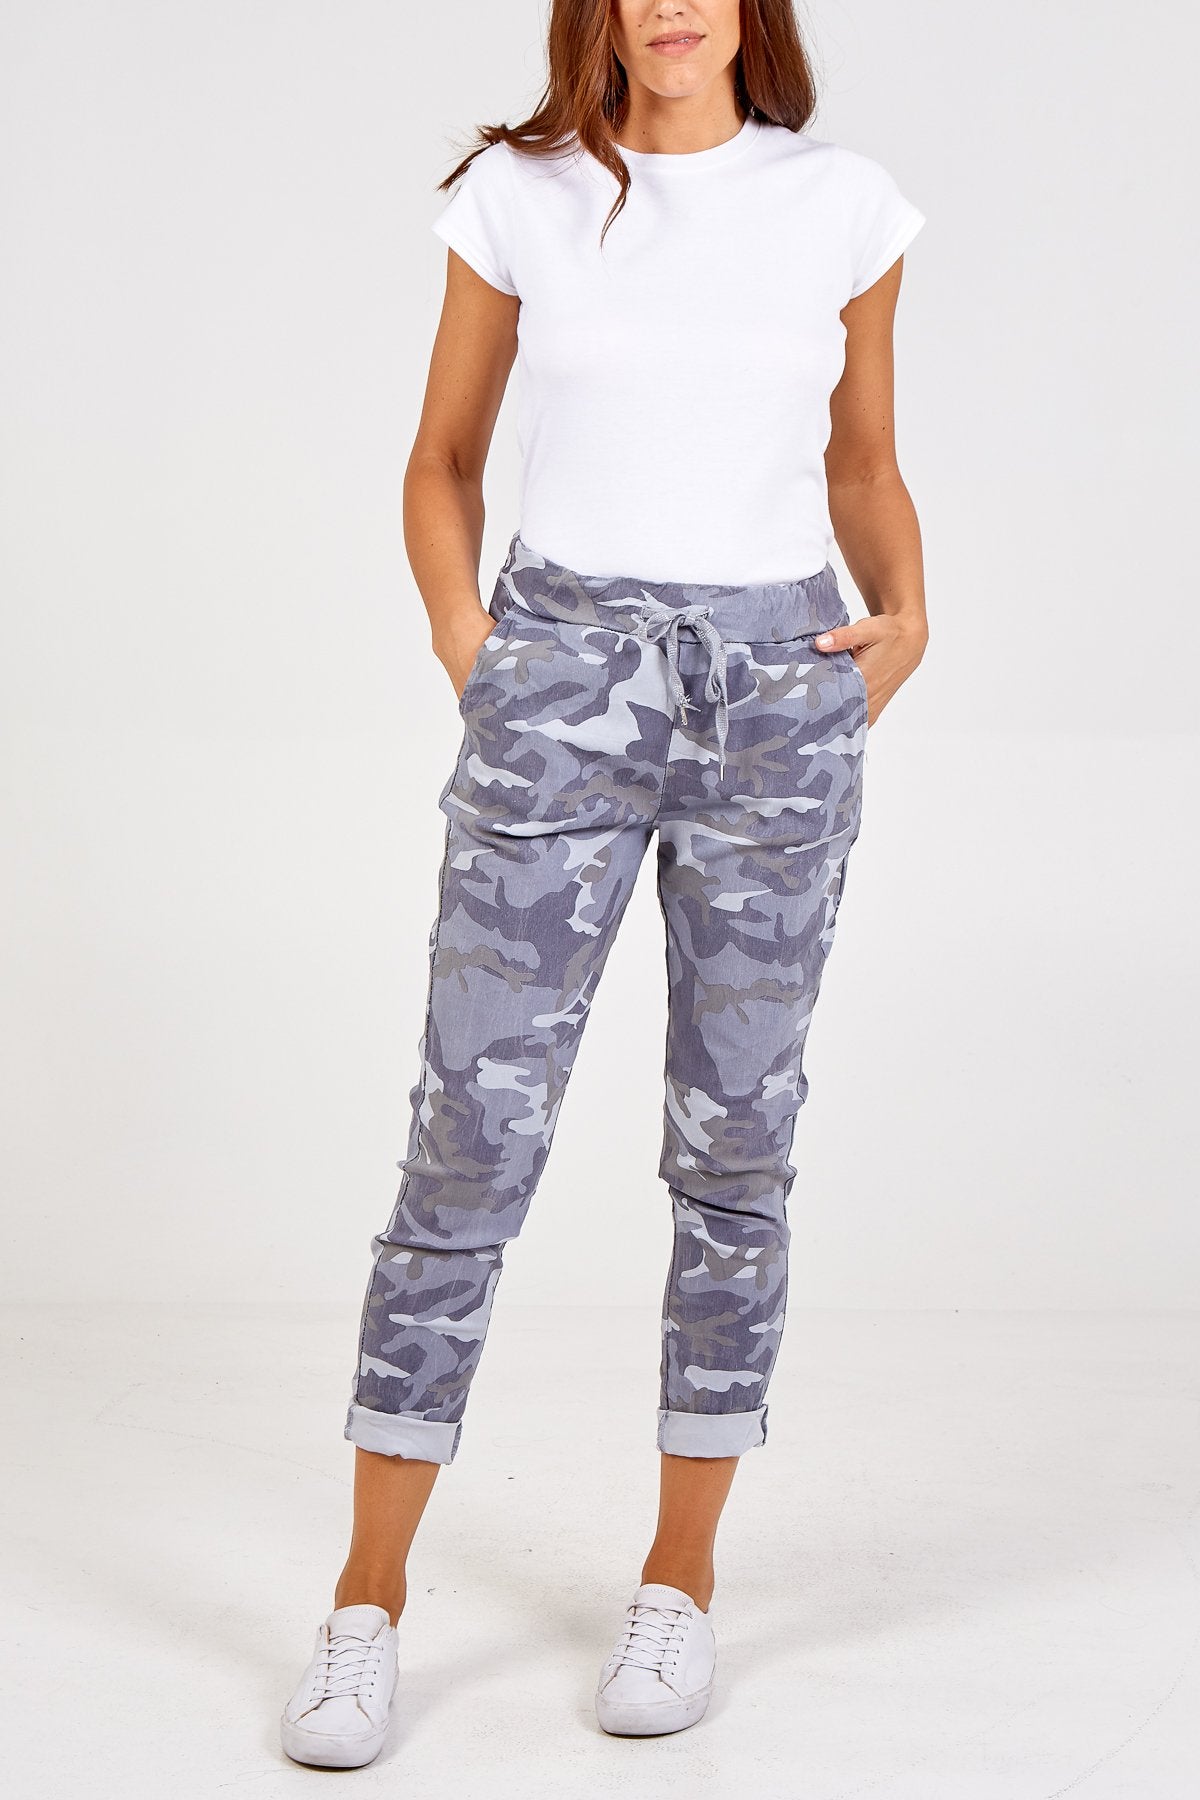 Gill Plus Sized Magic Camouflage Trousers - Grey - Liven Boutique